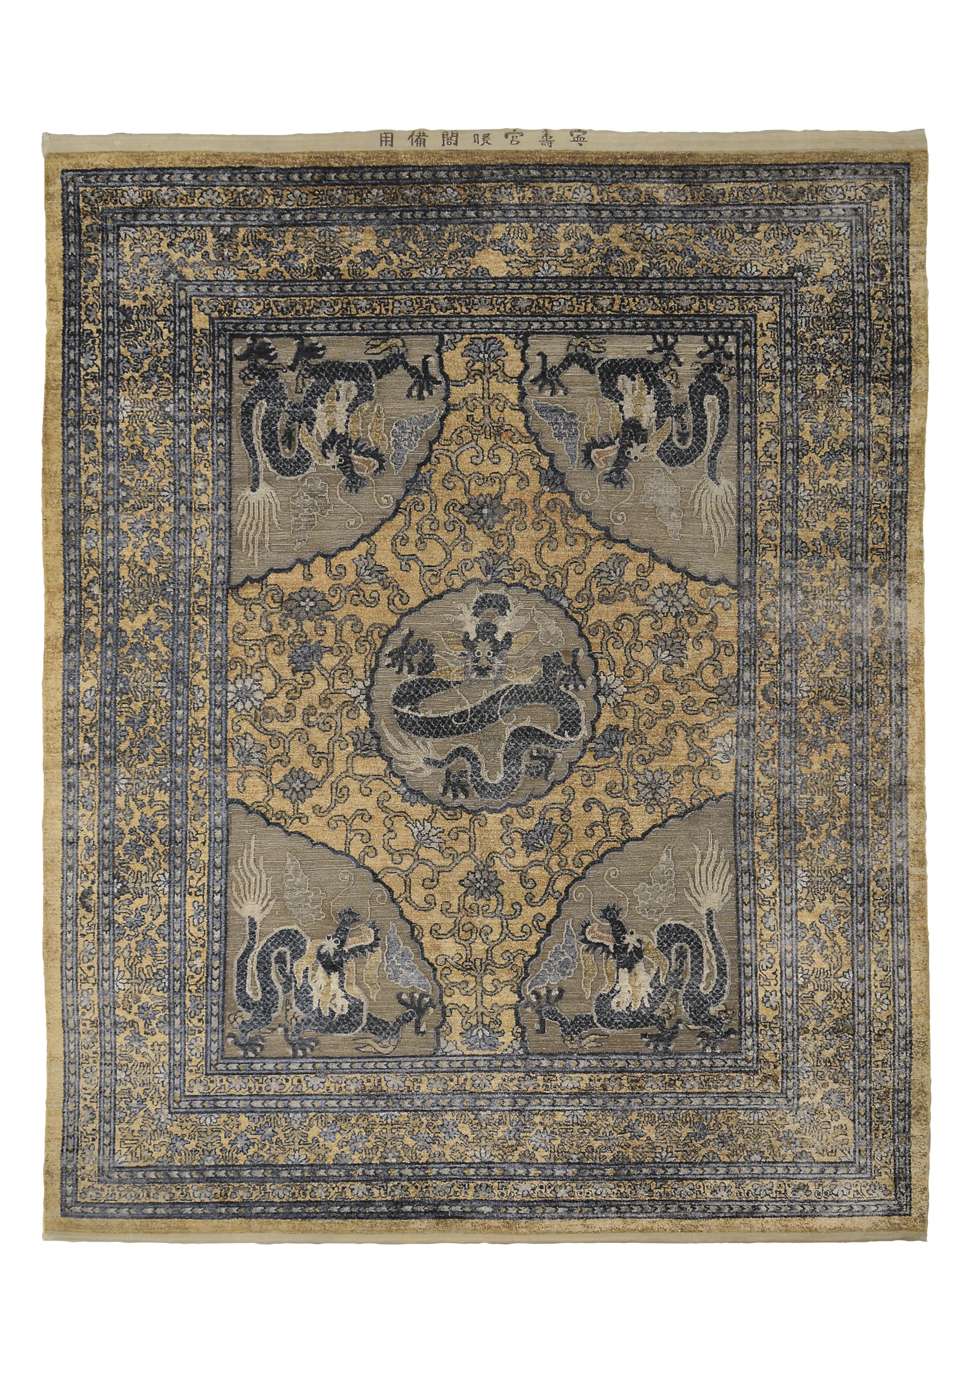 Dragon of Heaven, one of the 28 Chinese imperial carpets from the 18th and 19th centuries in the MGM Cotai collection. Photo: Handout